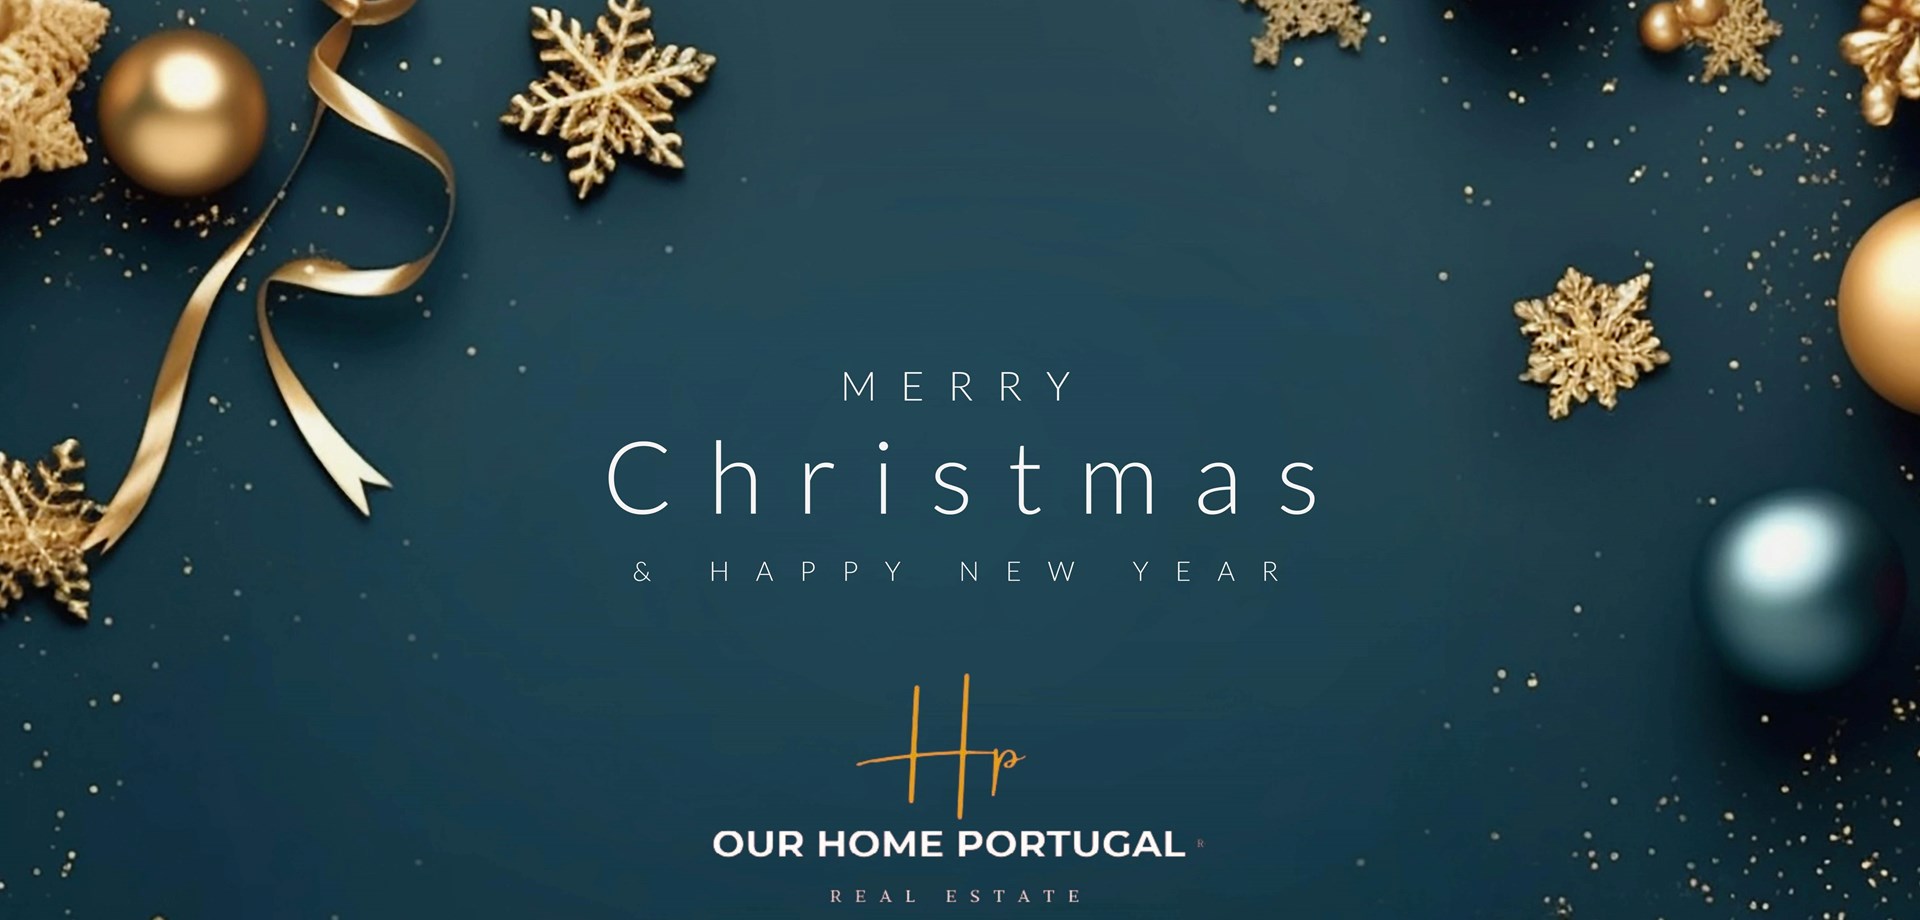 Christmas Traditions in Portugal